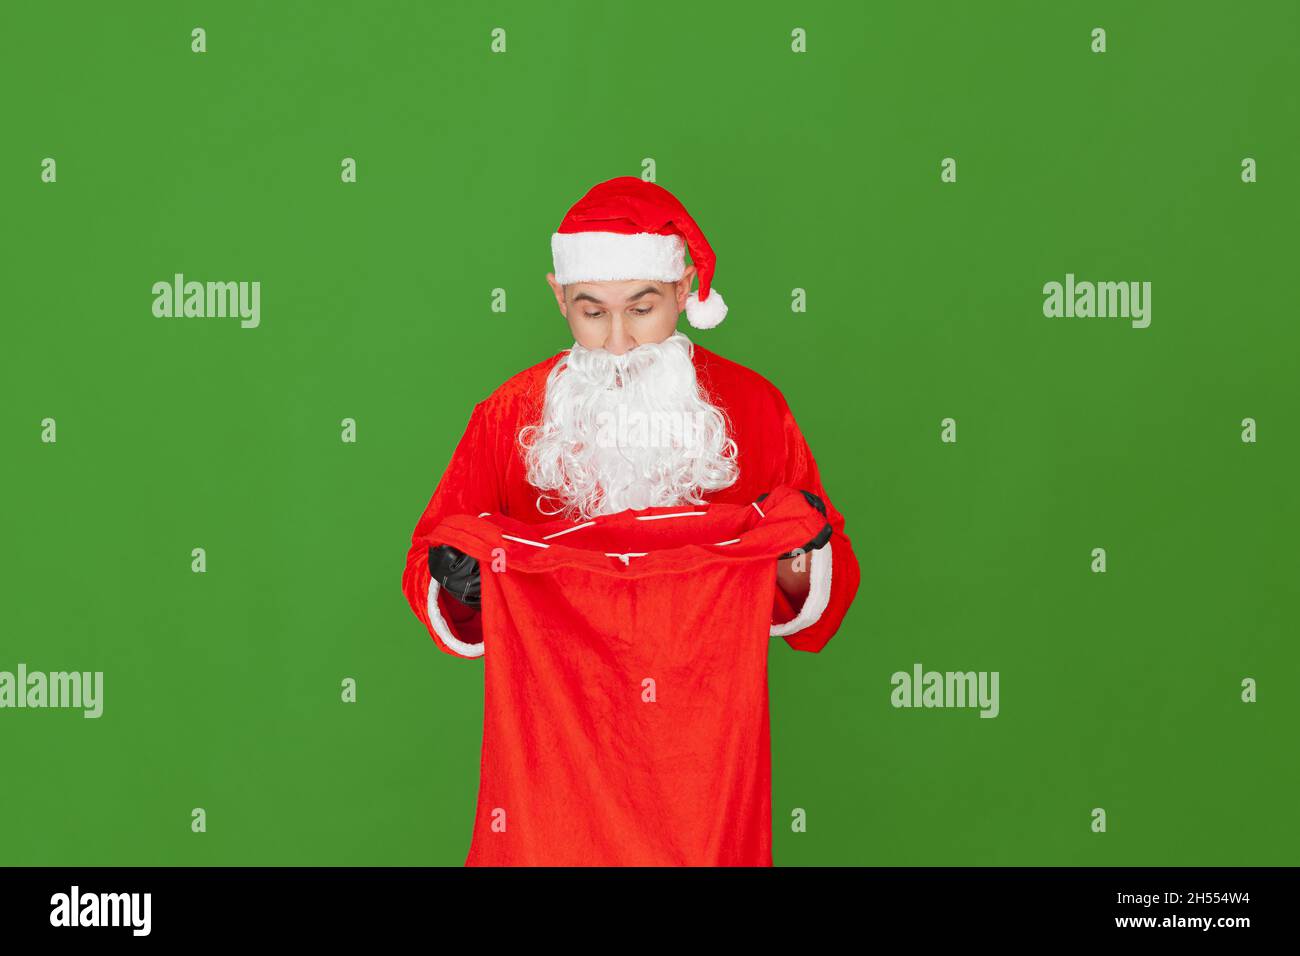 A Caucasian man dressed as Santa Claus is holding a red cloth sack open while looking inside with a surprised expression. The background is green. Stock Photo